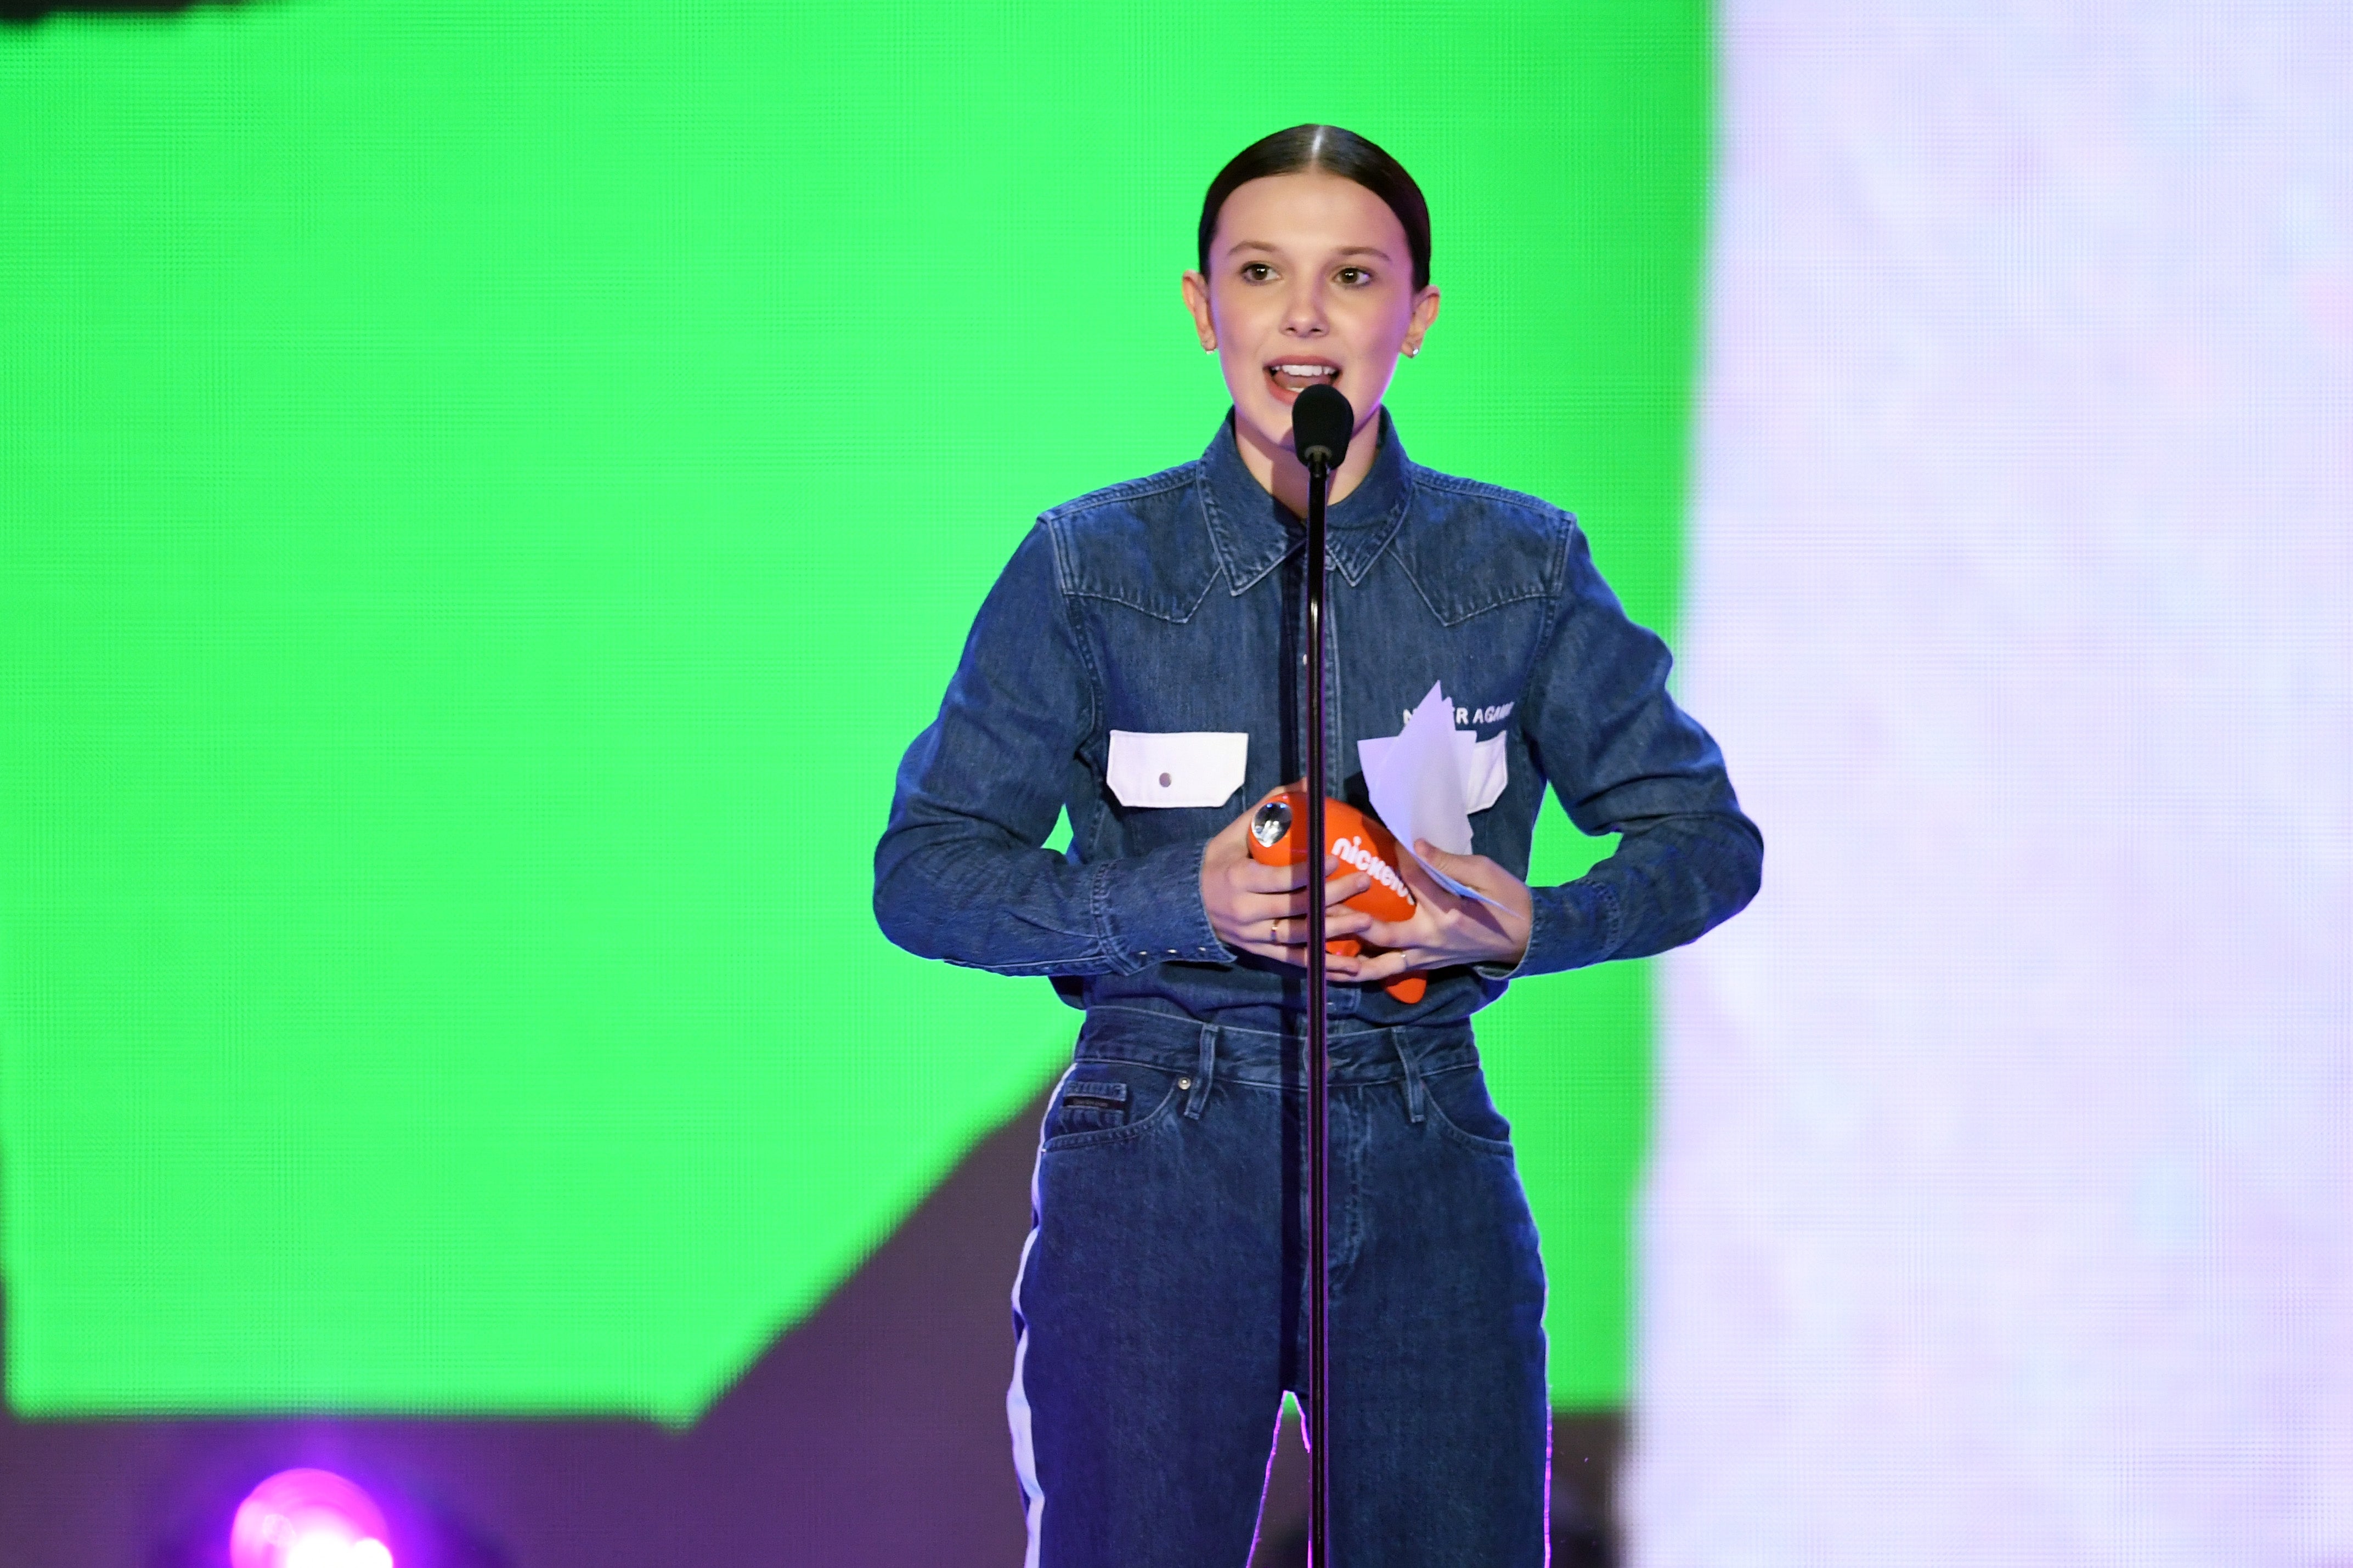 Millie Bobby Brown's 2018 Kids' Choice Awards Look Paid Homage to